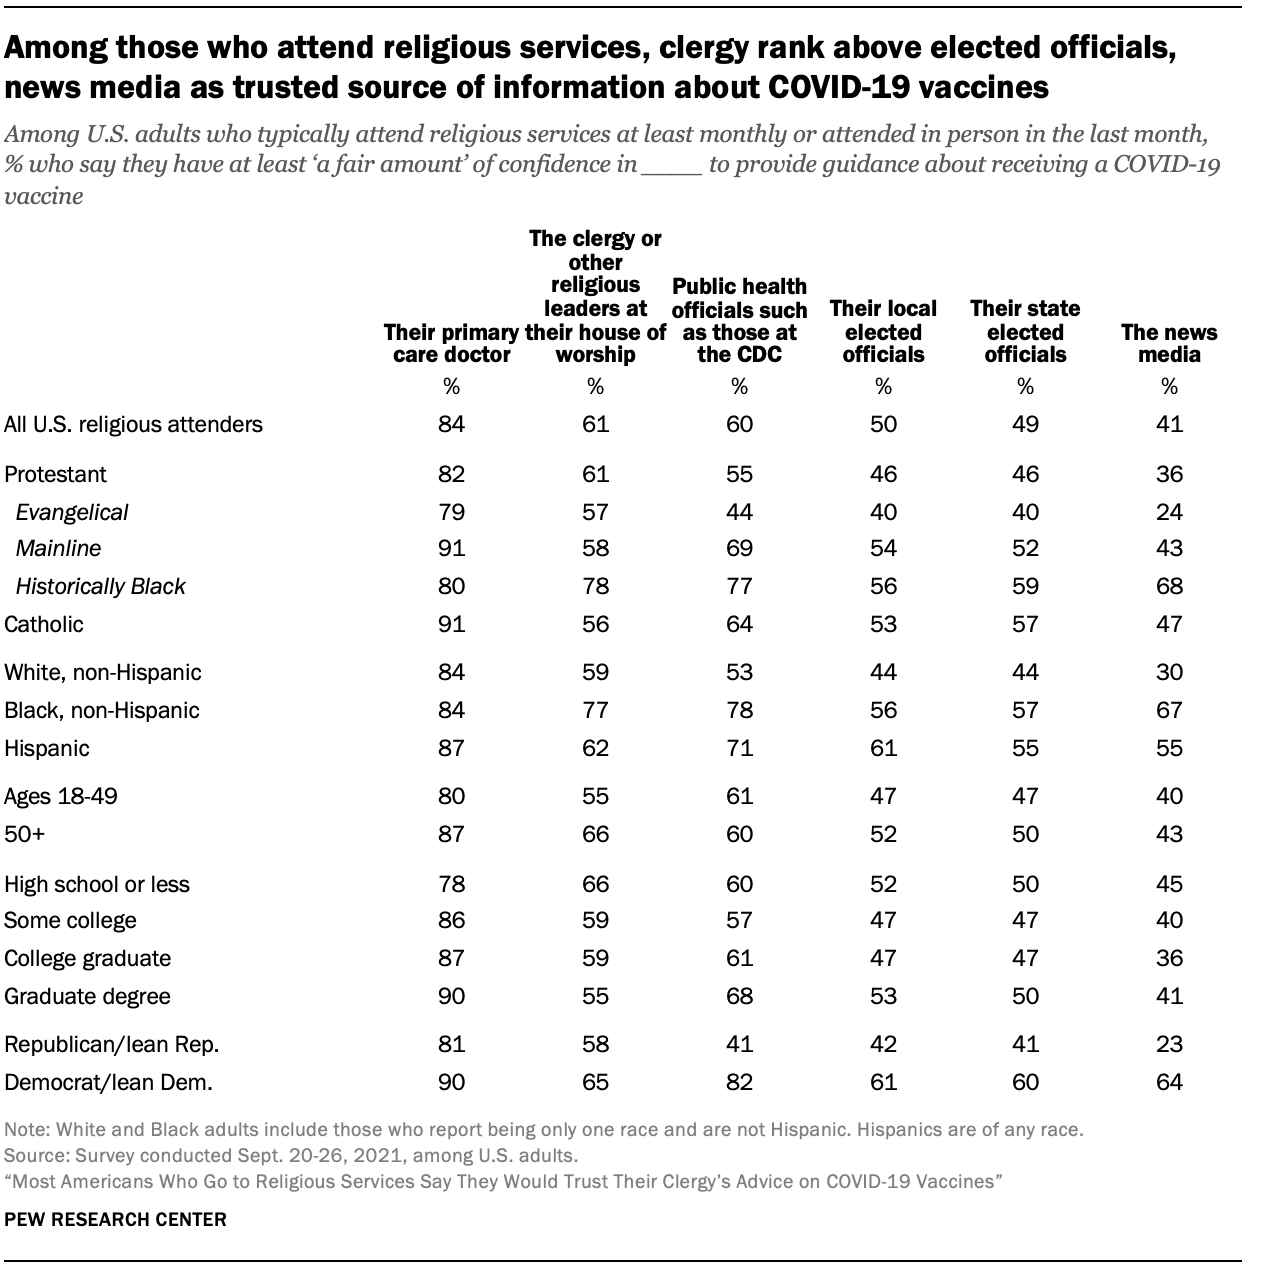 Among those who attend religious services, clergy rank above elected officials, news media as trusted source of information about COVID-19 vaccines